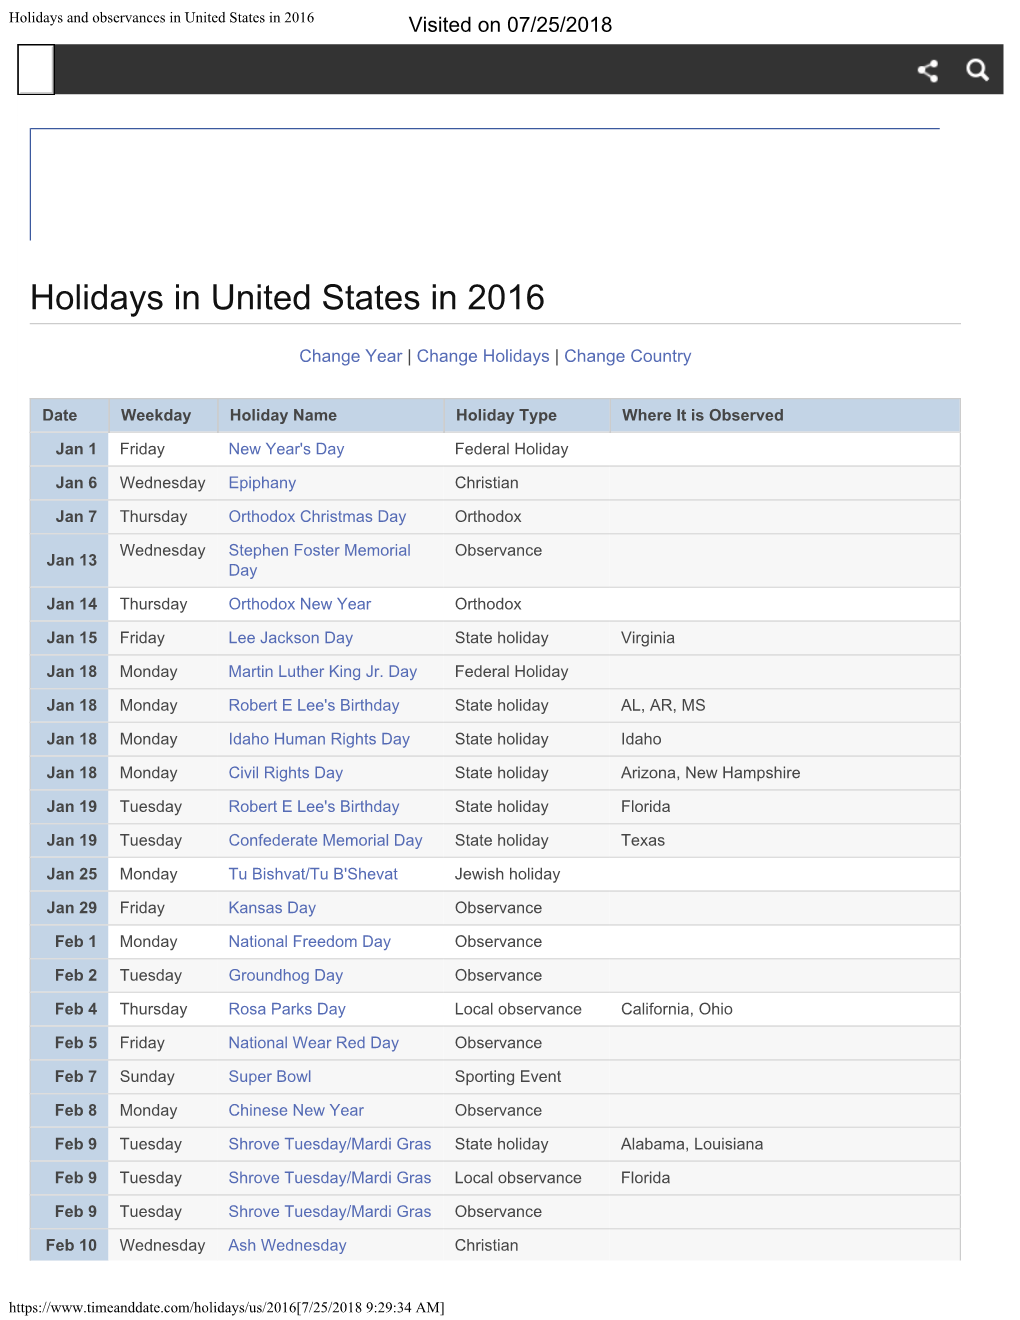 Holidays and Observances in United States in 2016 Visited on 07/25/2018